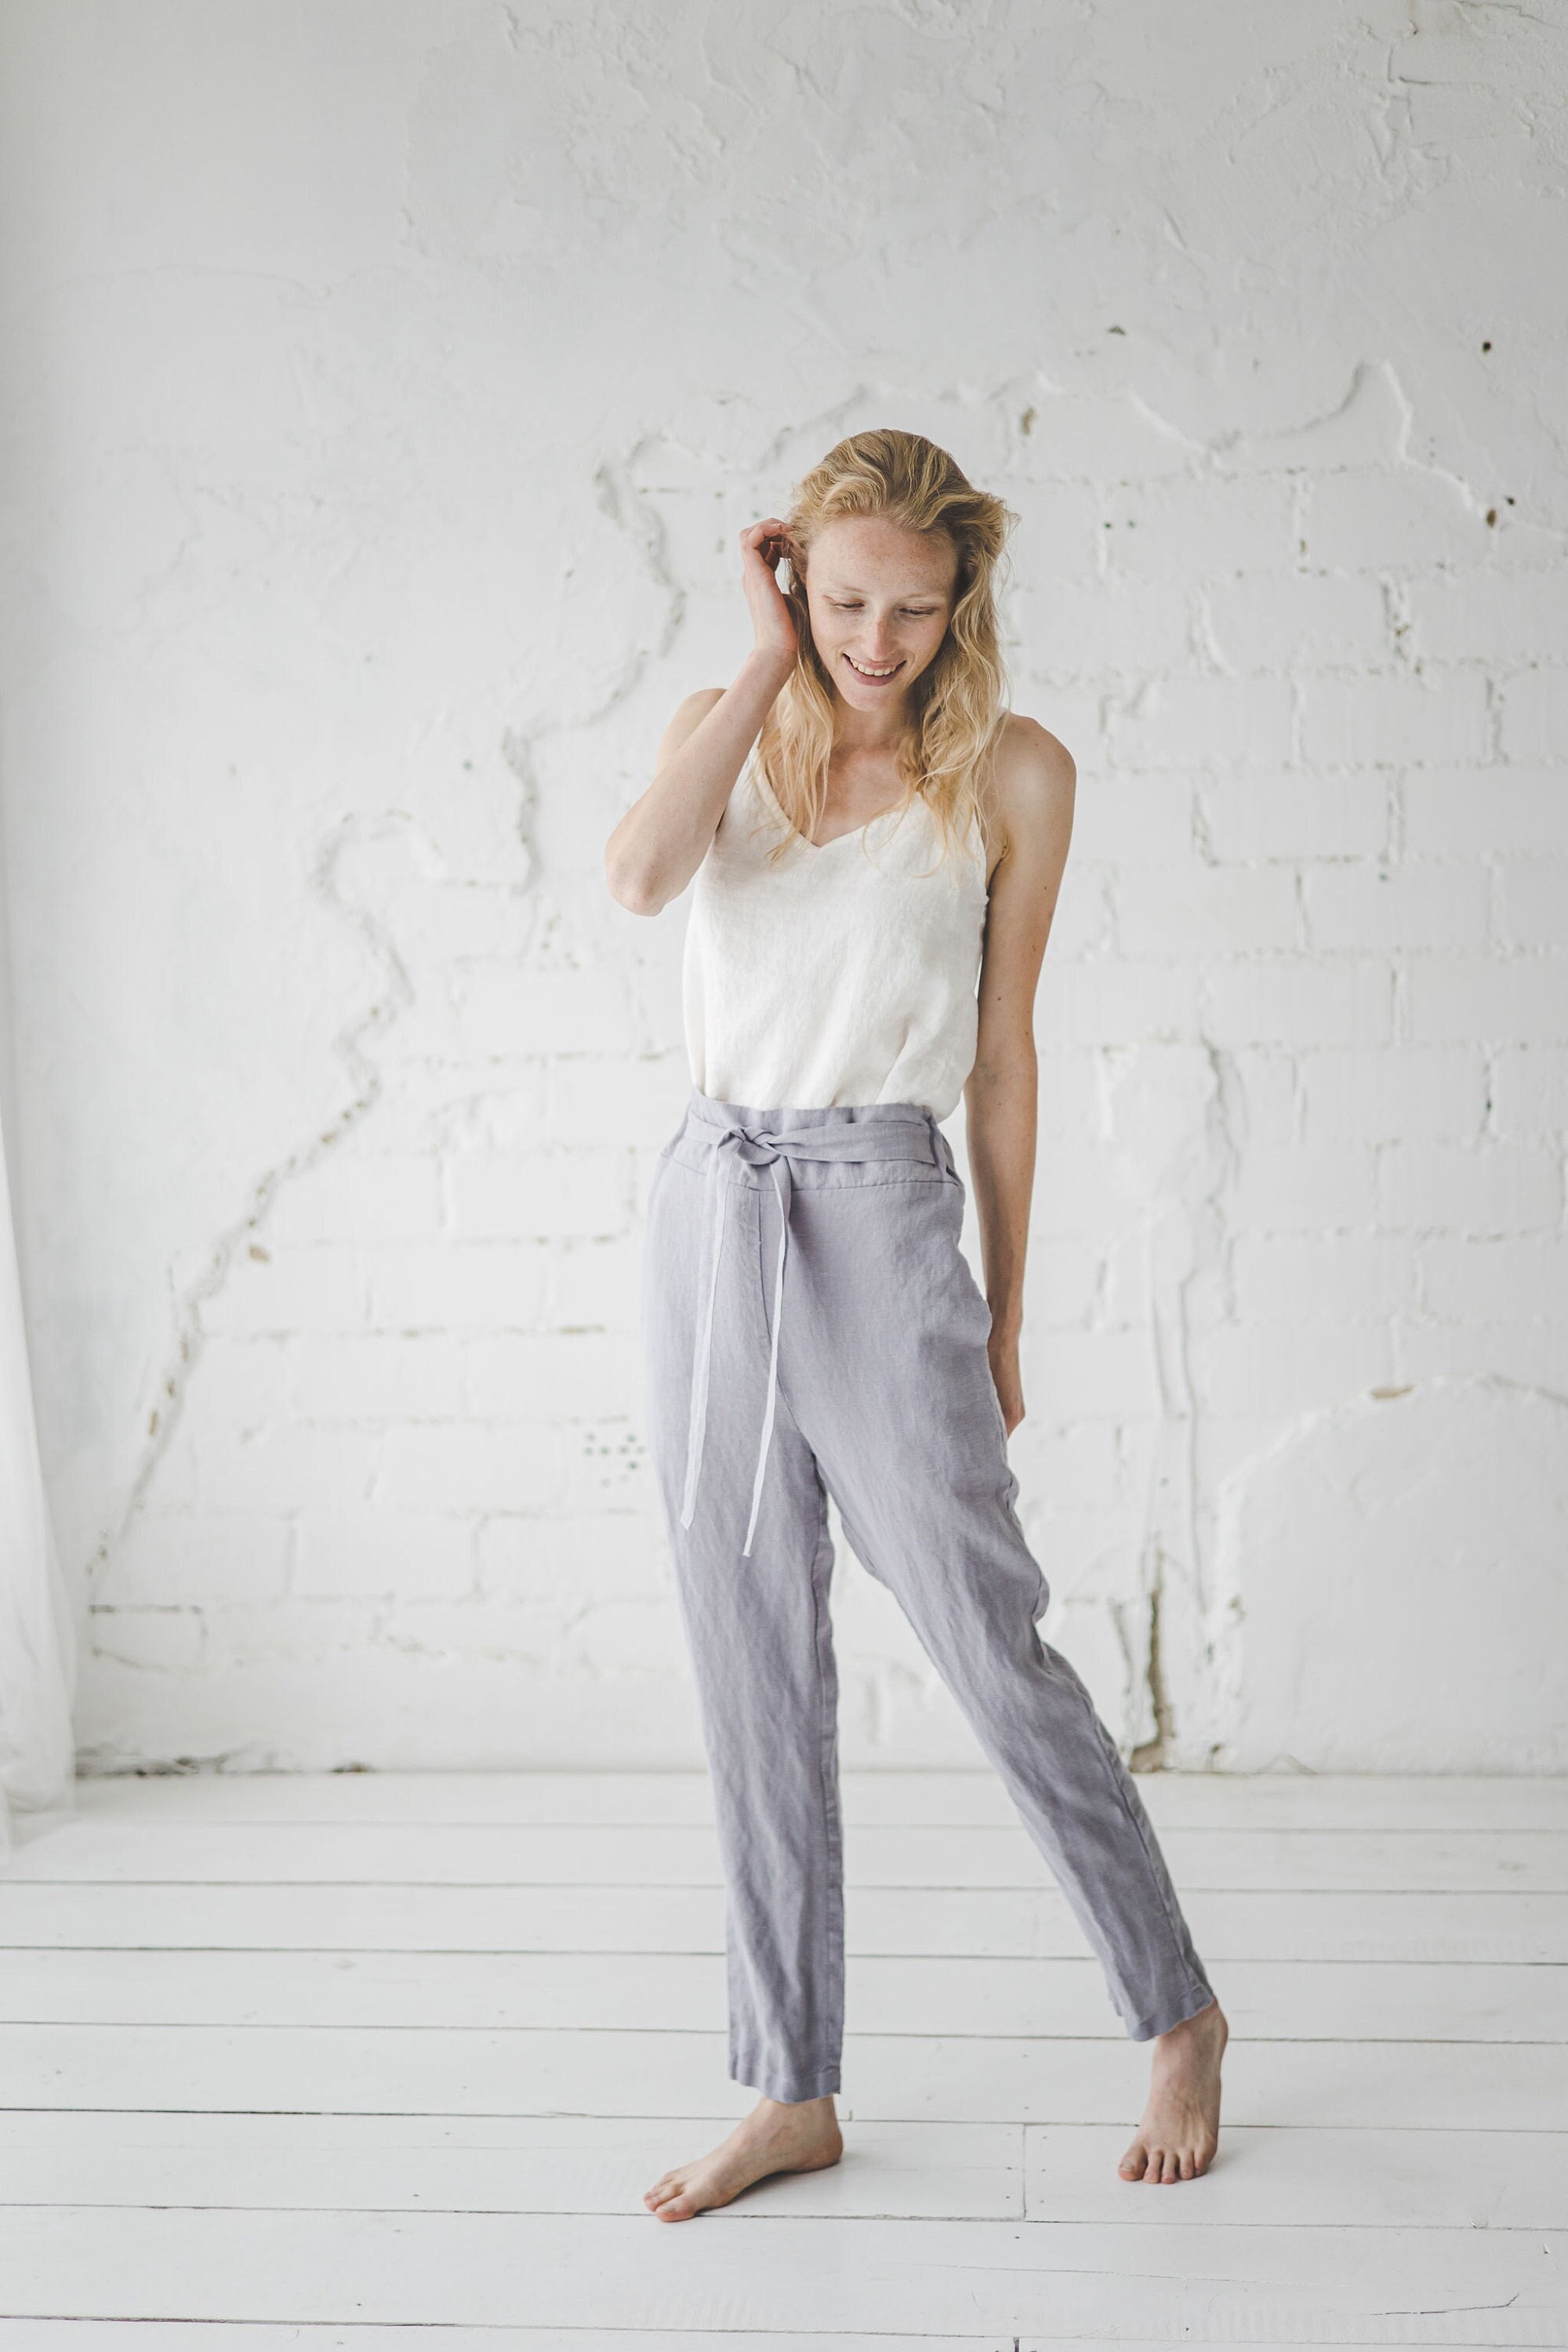 Slim Ankle Linen Trousers, Linen Pants High Waisted, Women Pants With Belt,  Tapered Linen Pants -  Australia